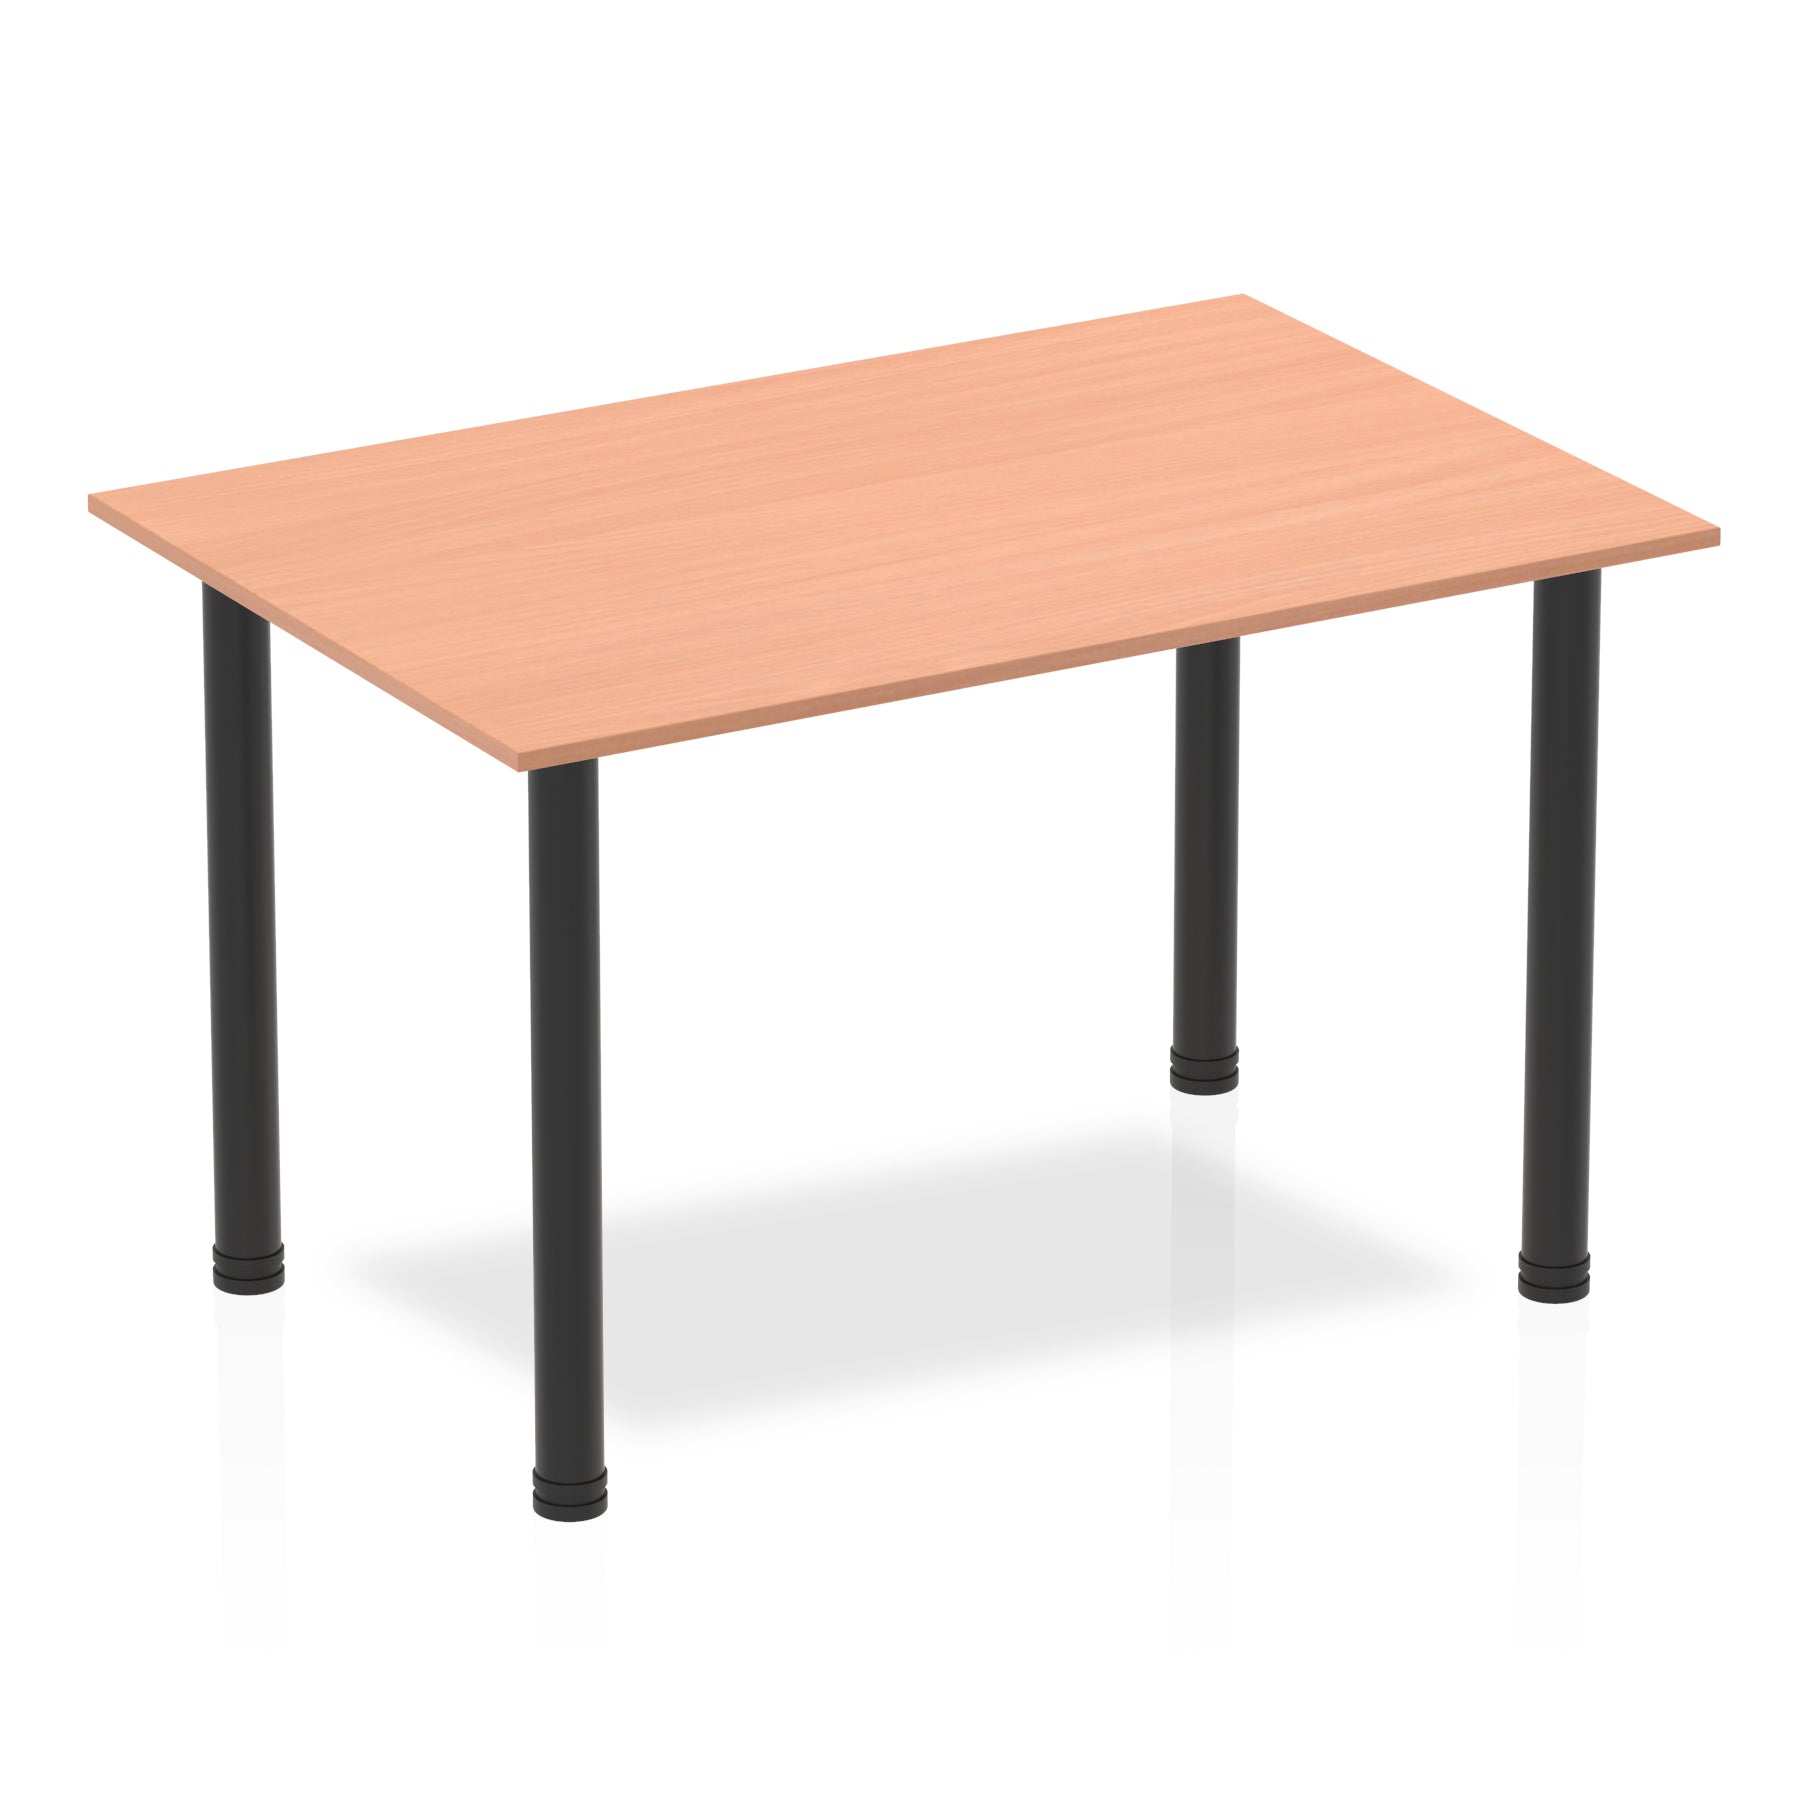 Photos - Dining Table Dynamic Office Solutions Impulse 1200mm Straight Table With Post Leg I0035 